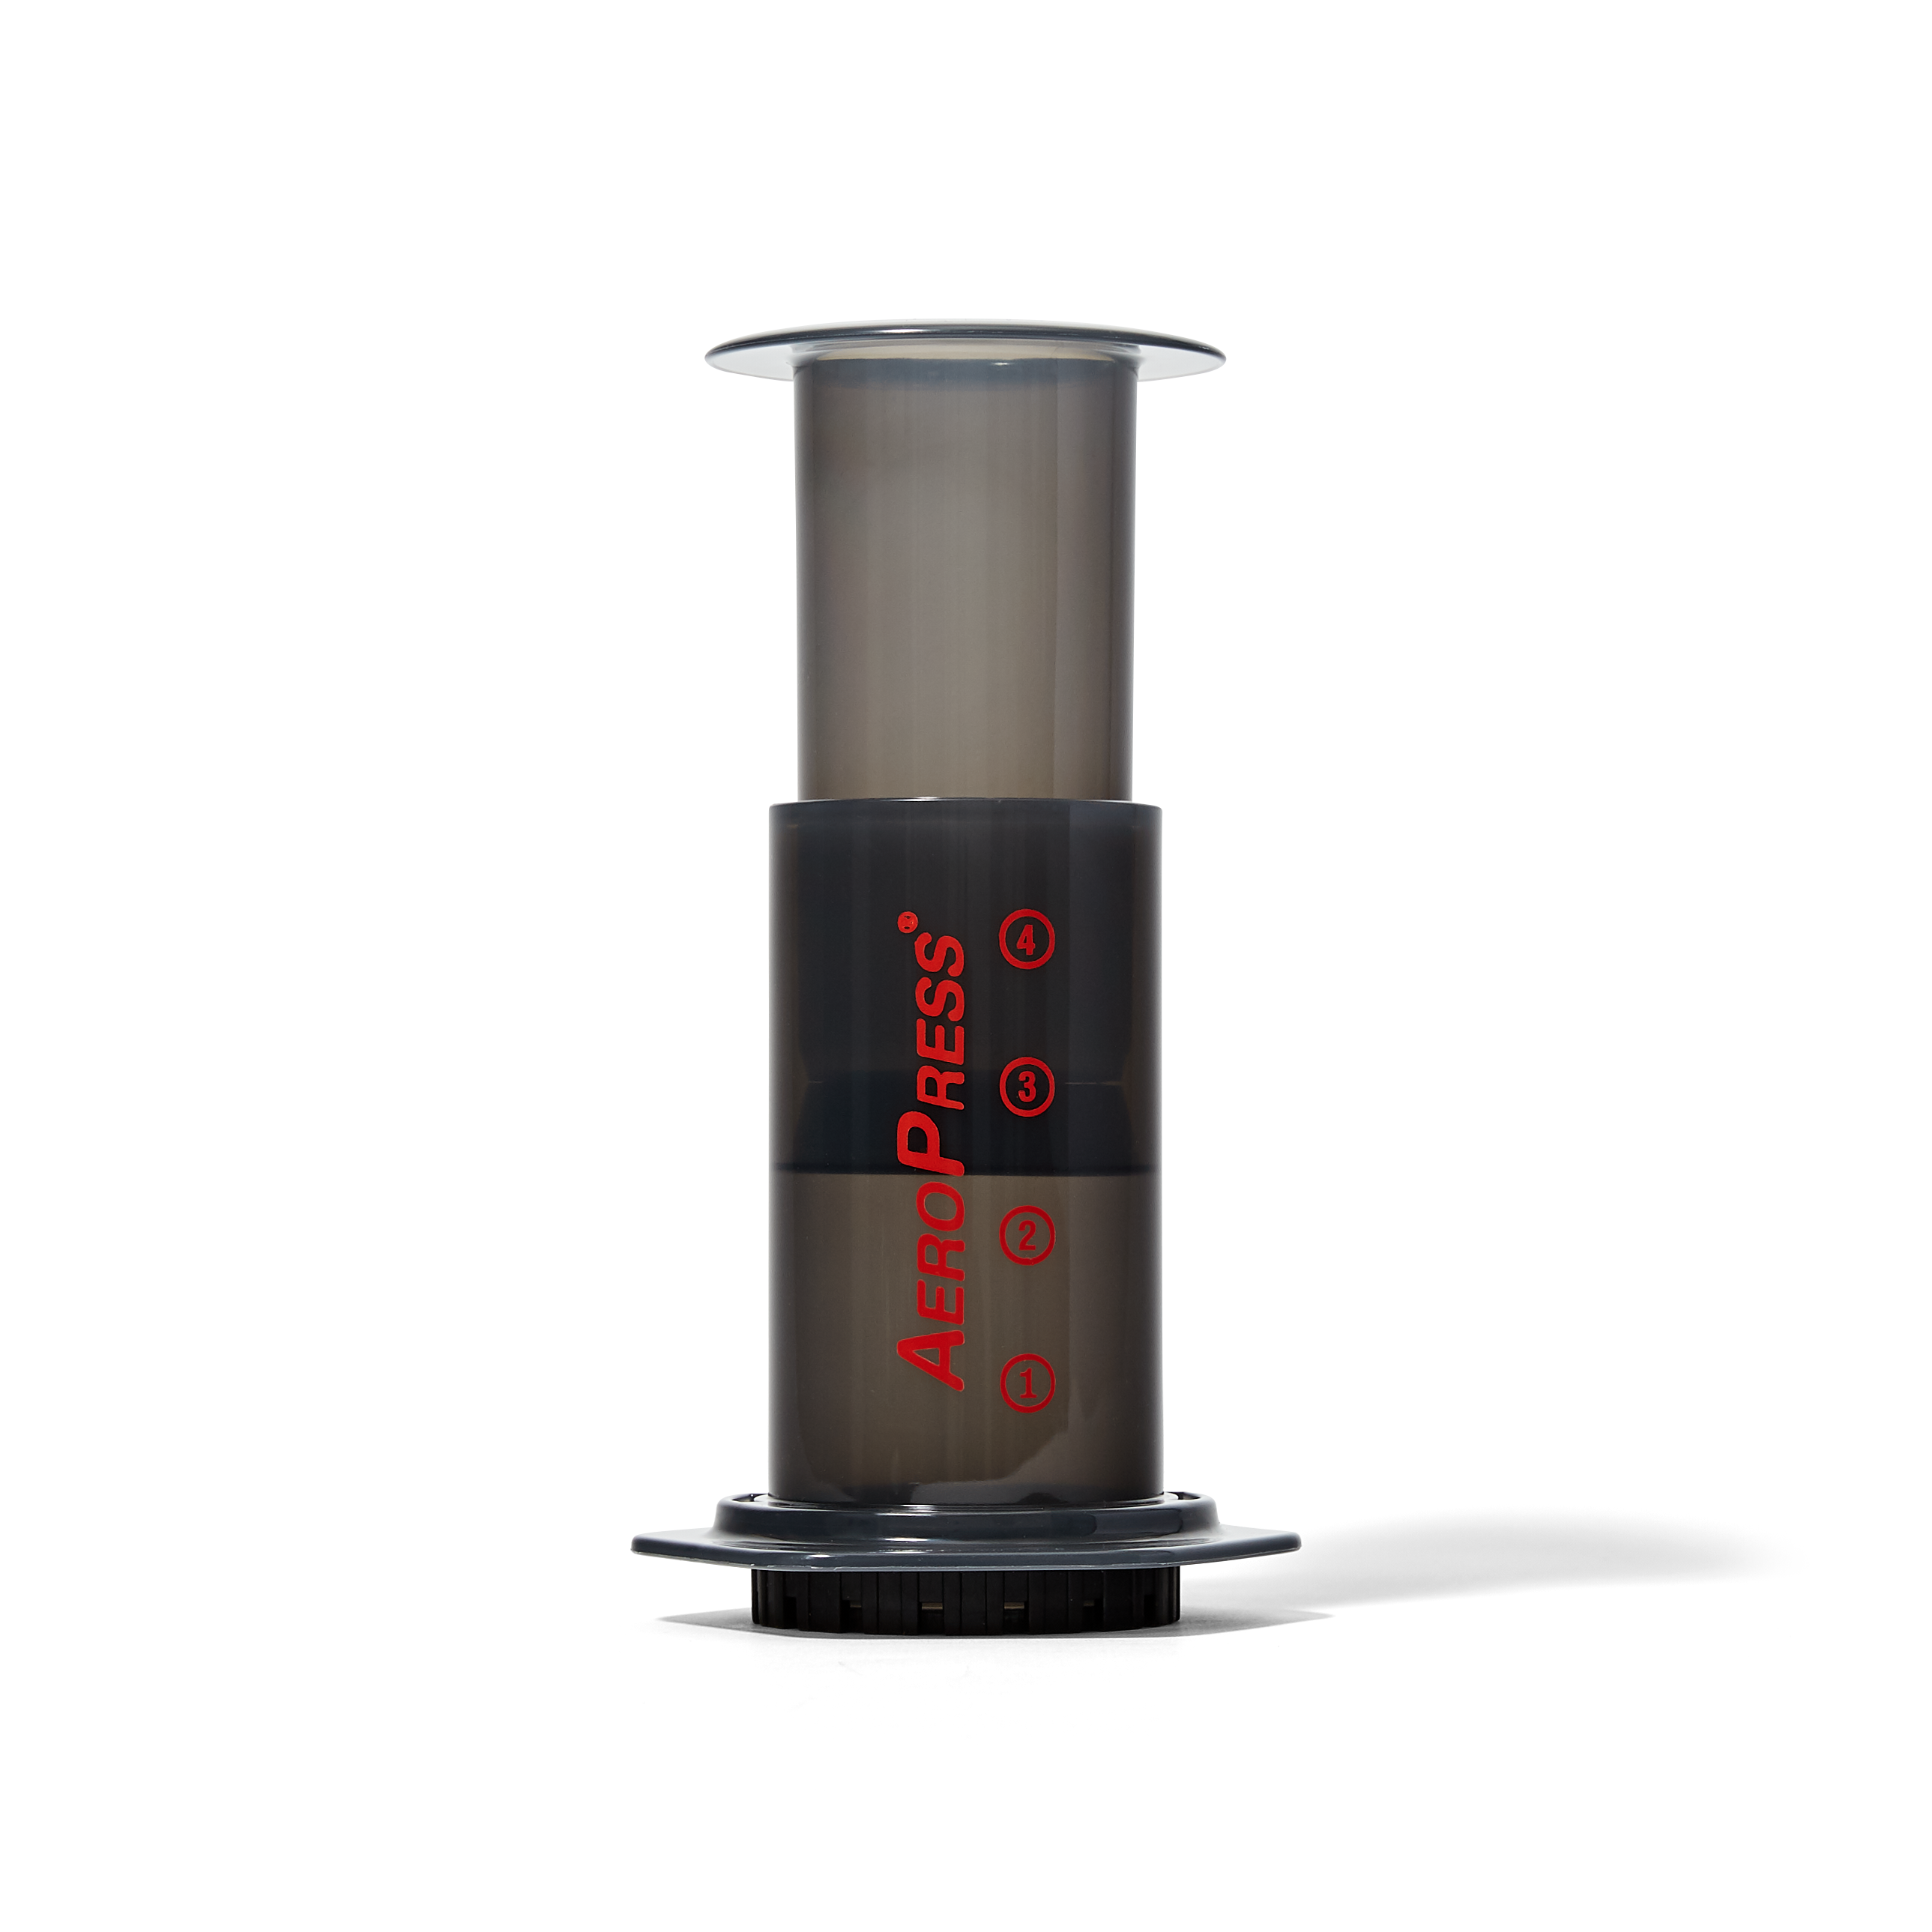 Cafetera Aeropress – One Cup Coffee Roasters